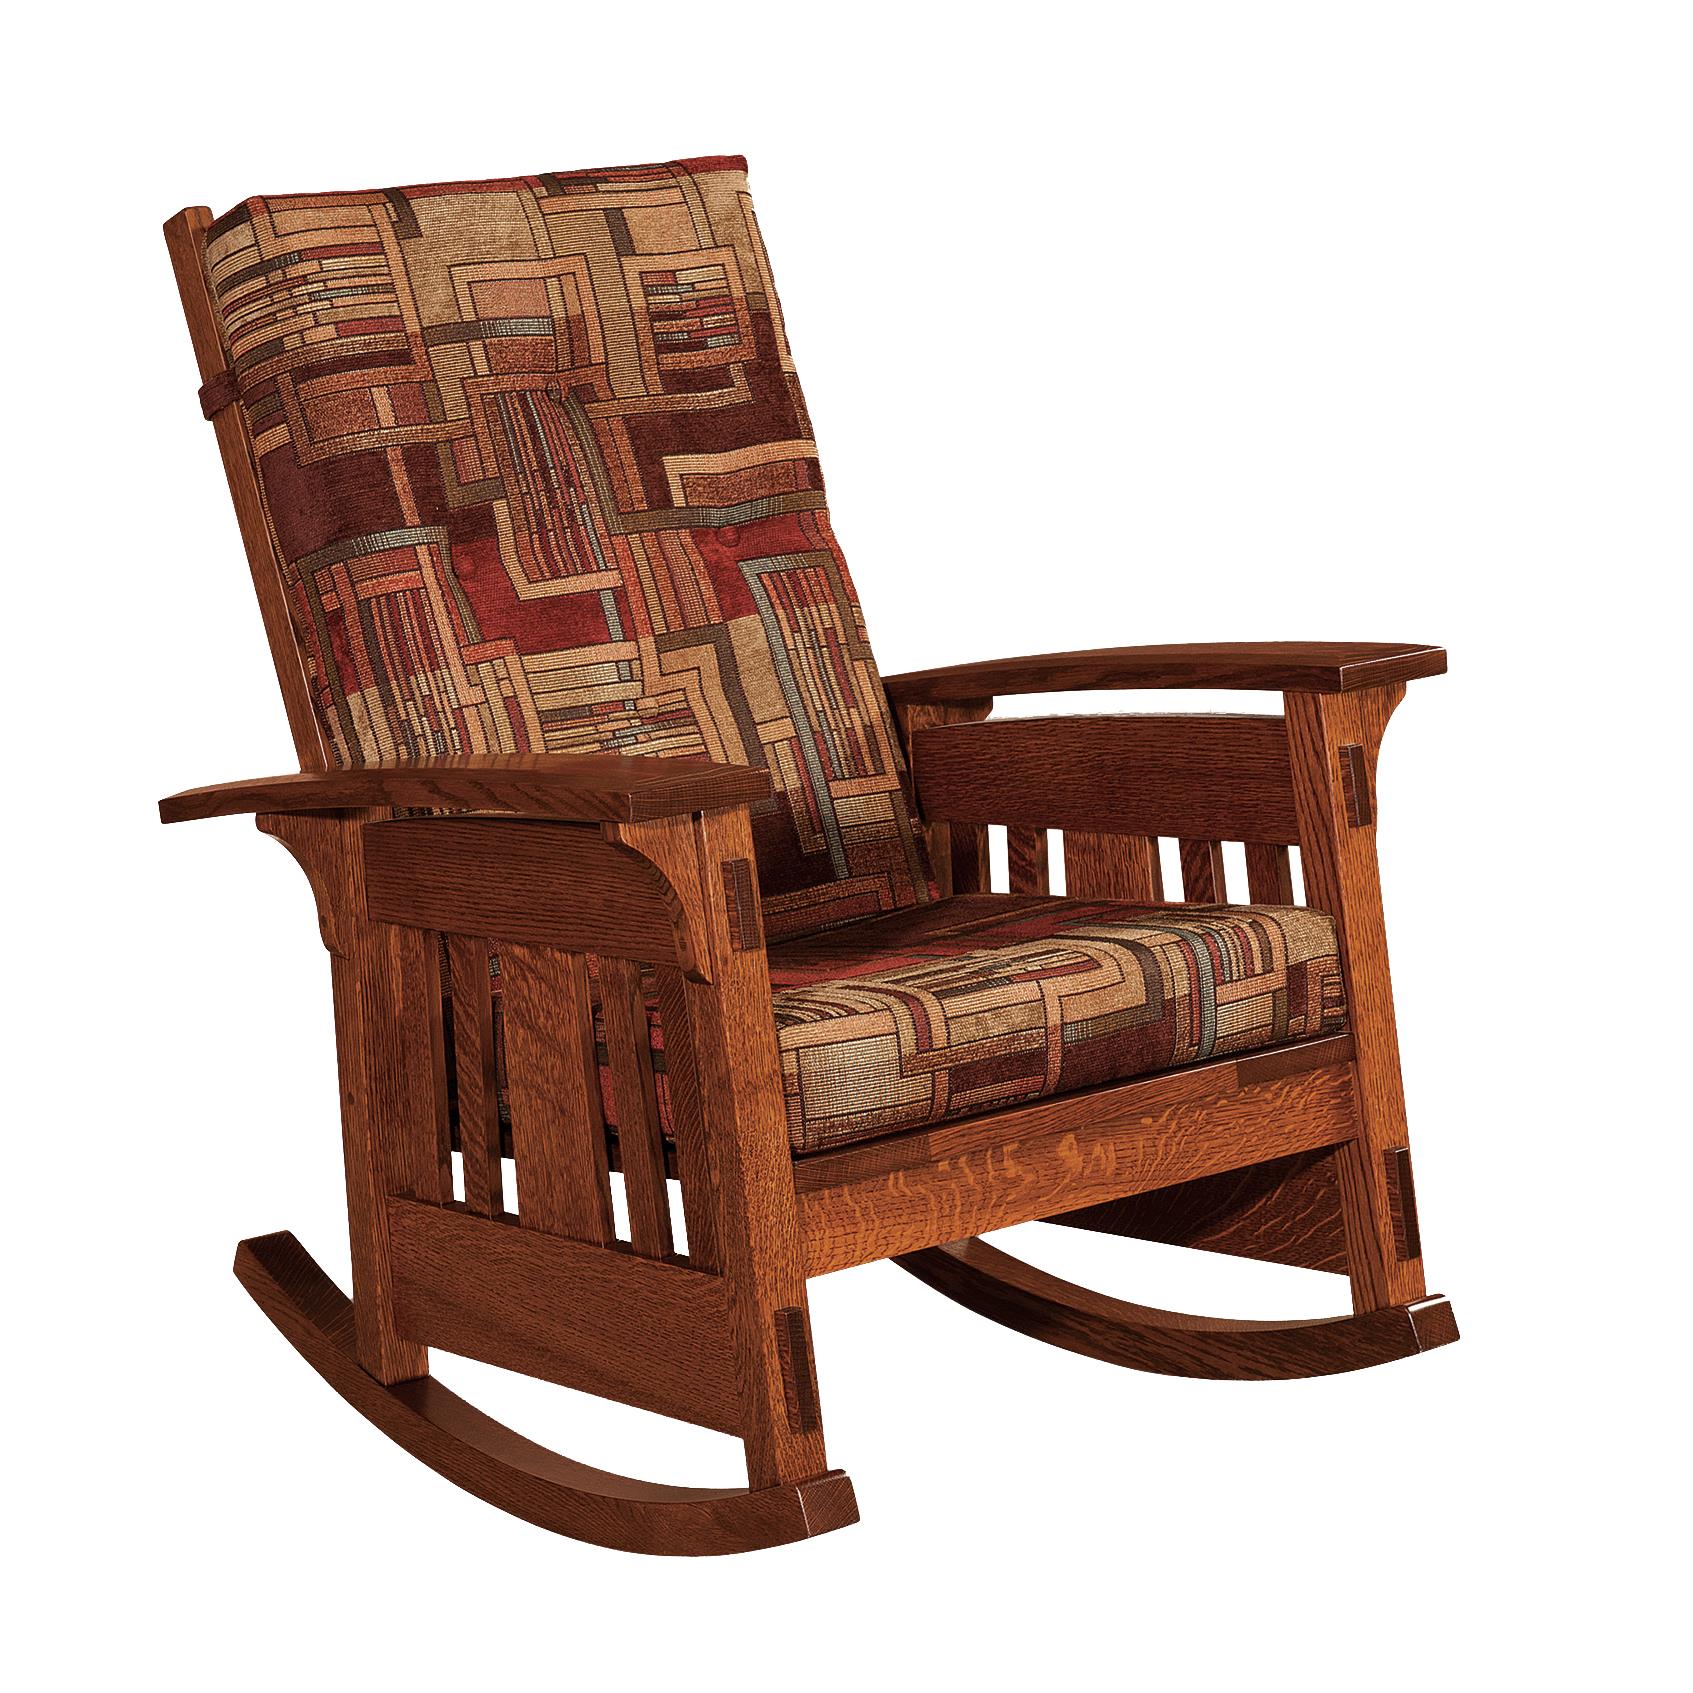 McCoy Upholstered Rocking Chair from DutchCrafters Amish Furniture